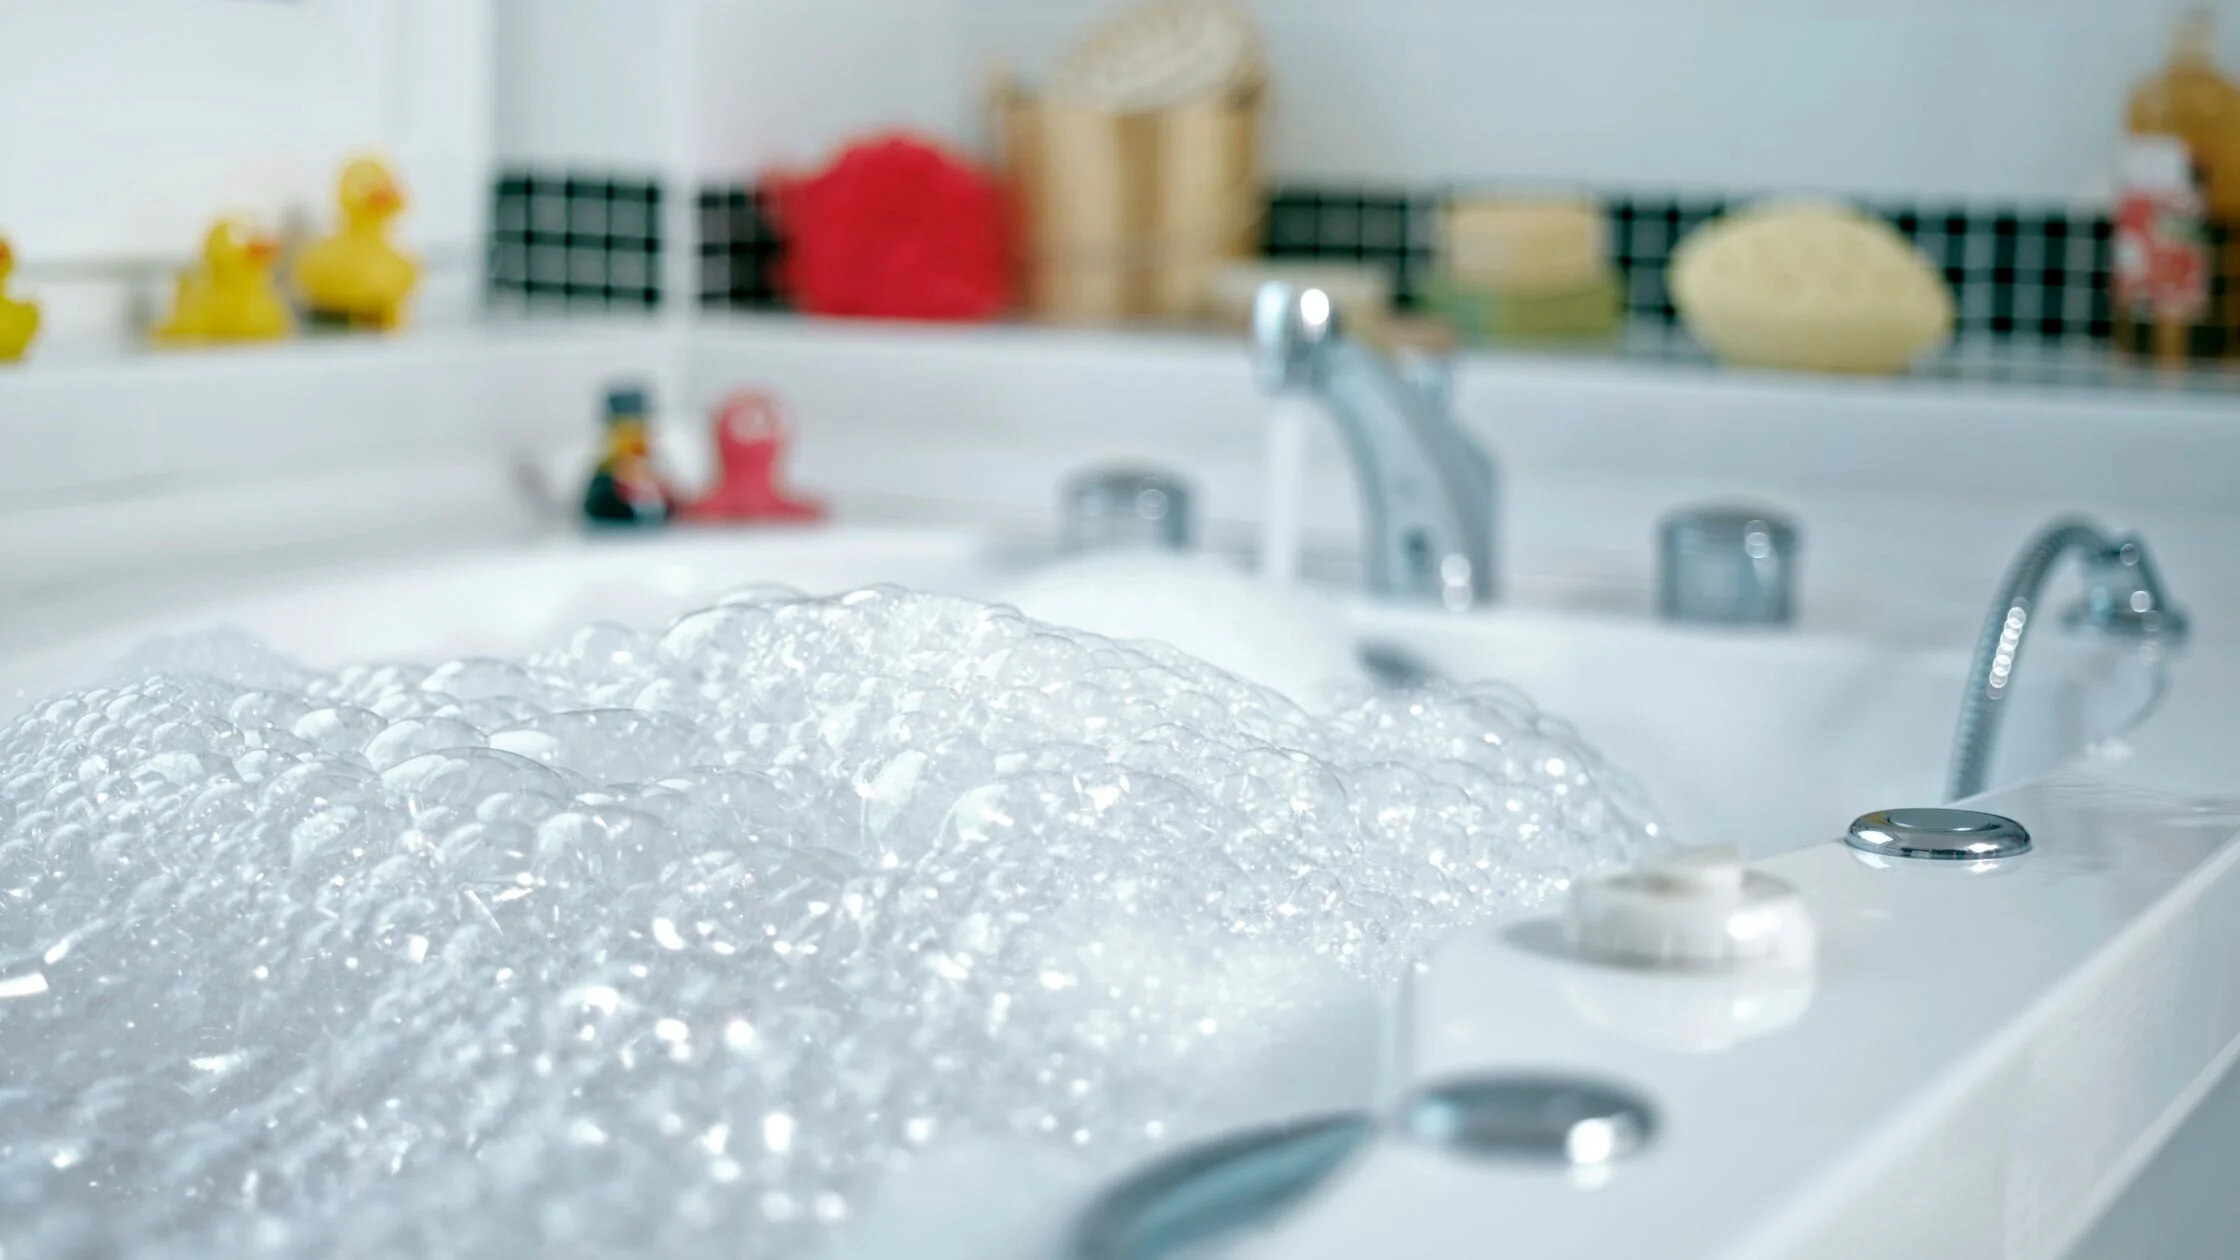 How To Make Bubbles In Bathtub